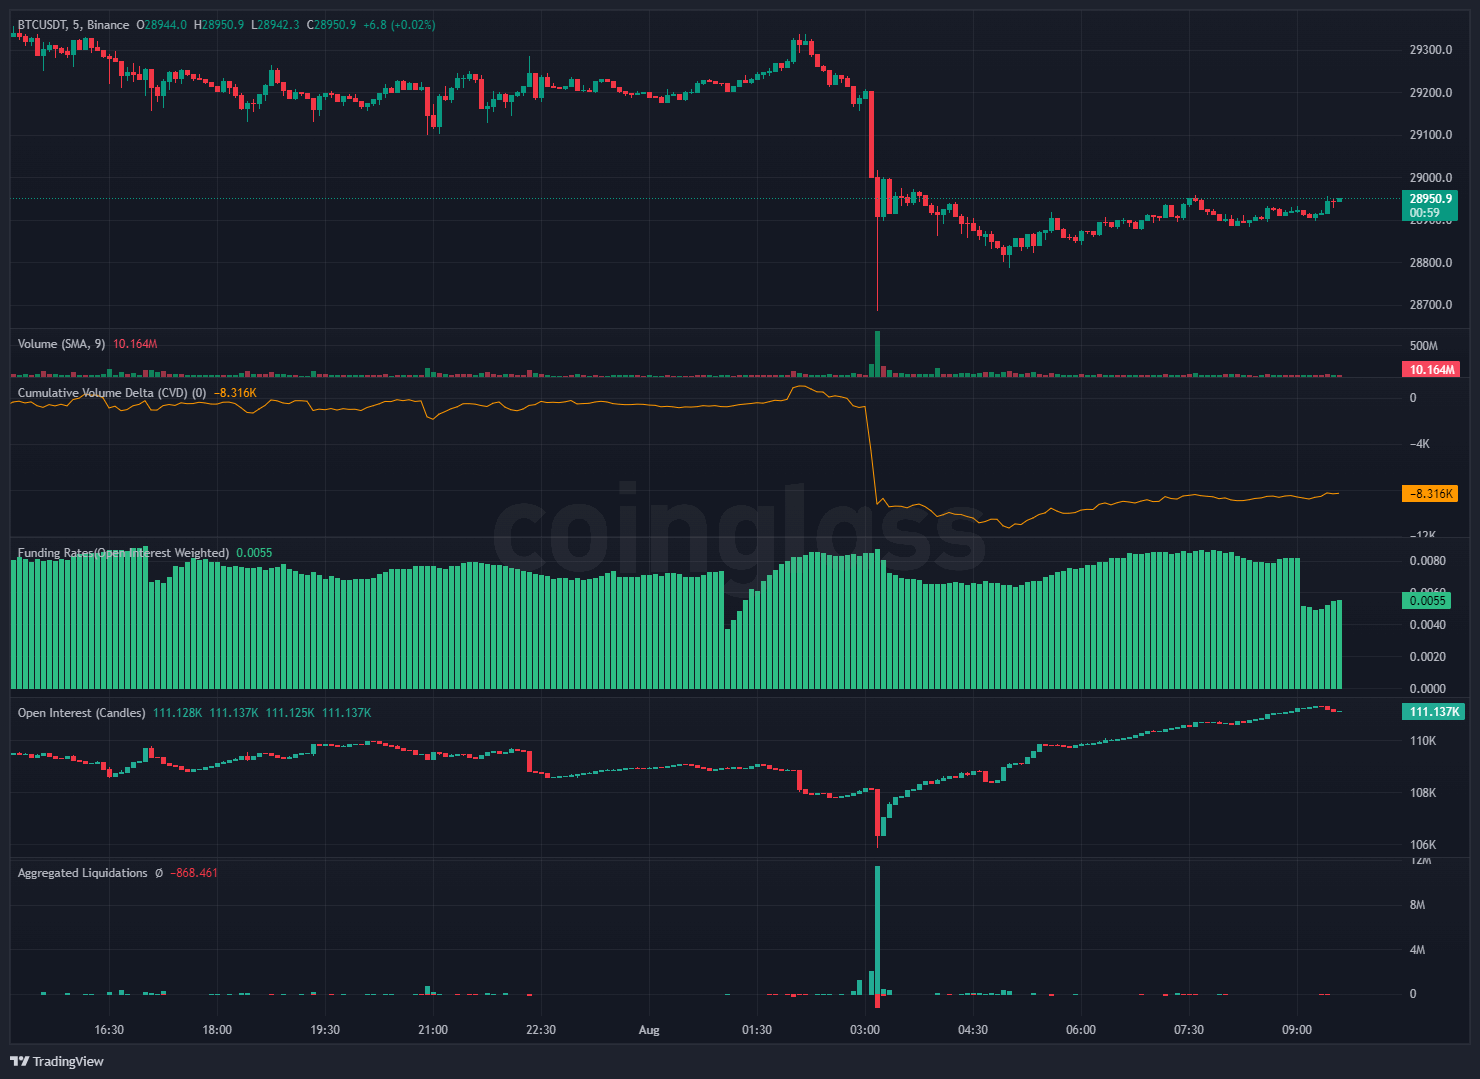 Bitcoin’s price drop supported by 100x leverage